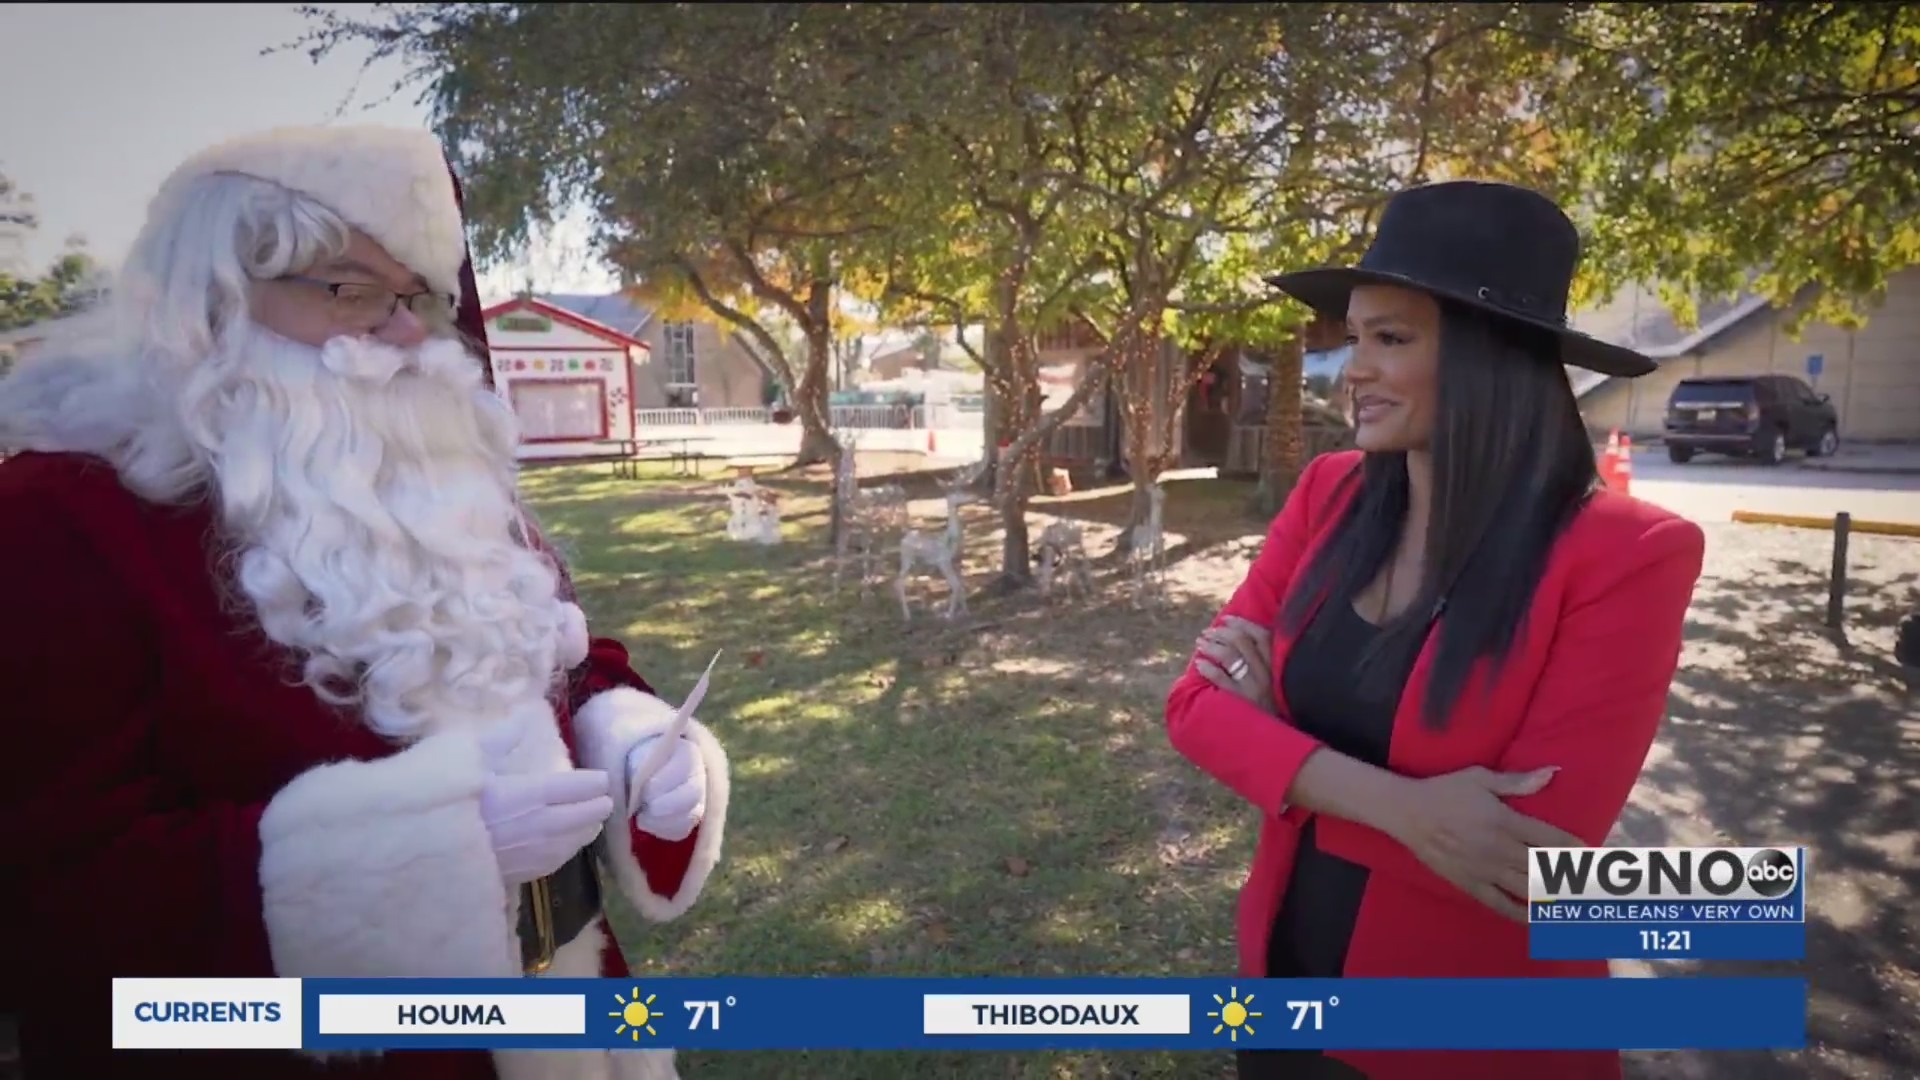 Tamica Lee and Santa Claus in Slidell